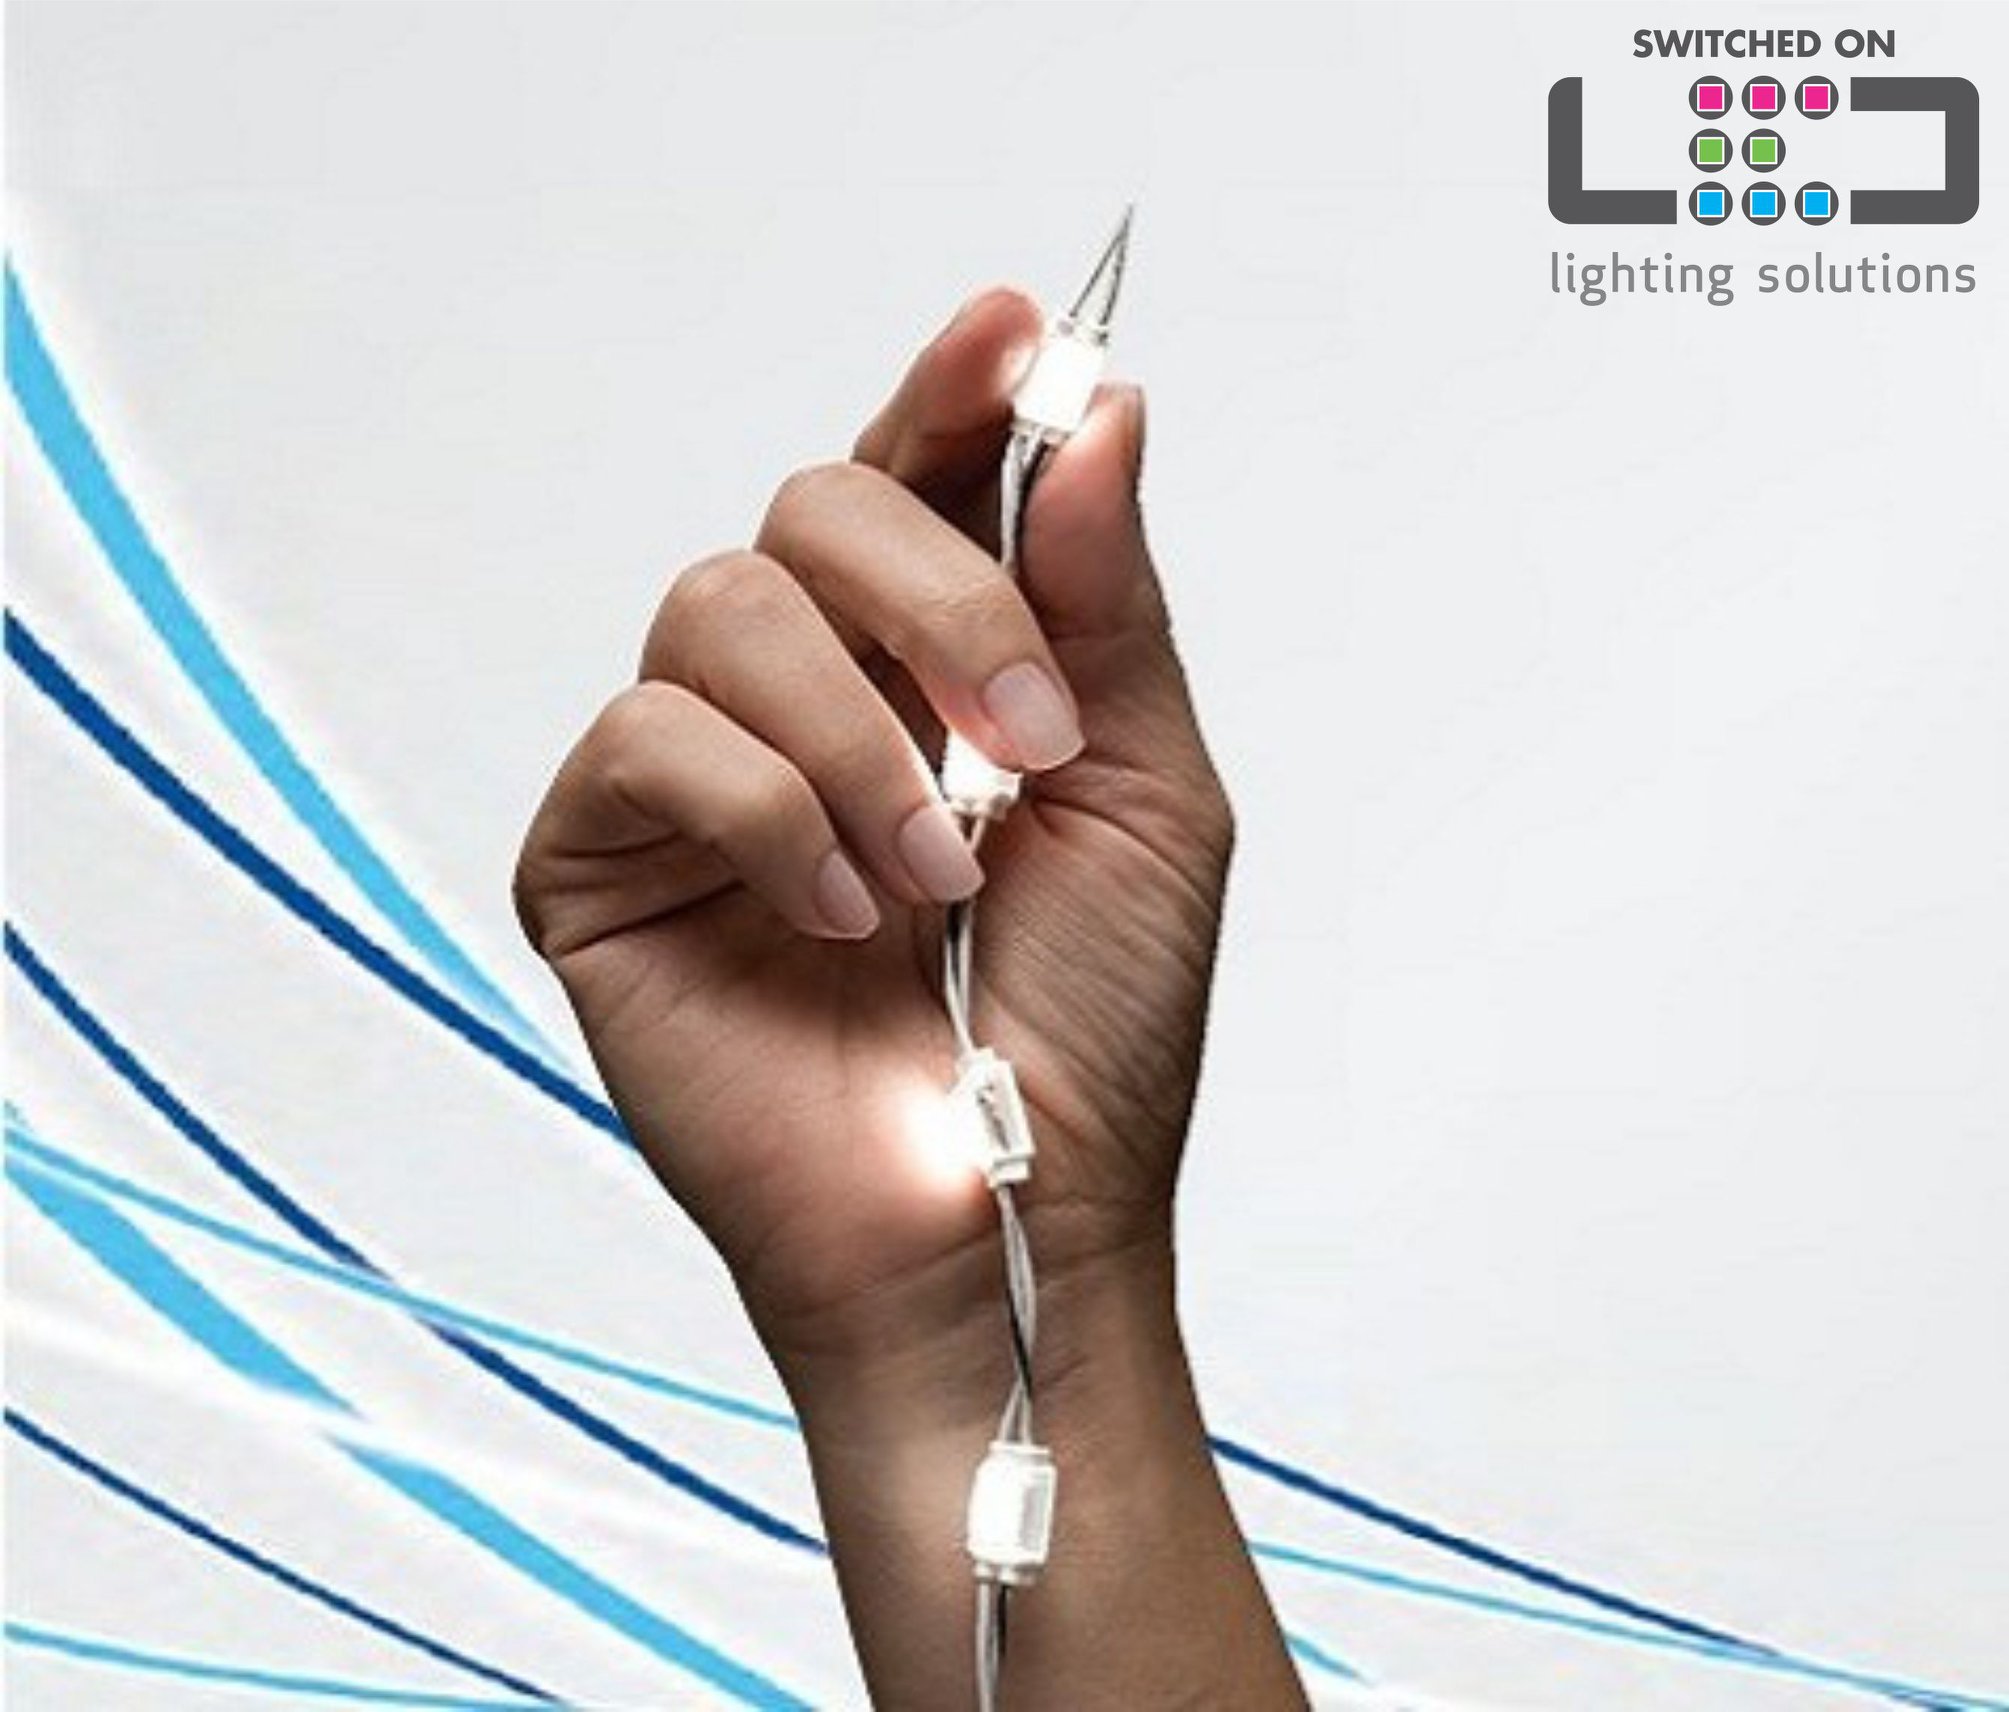 LED Lighting Installation & Wiring services